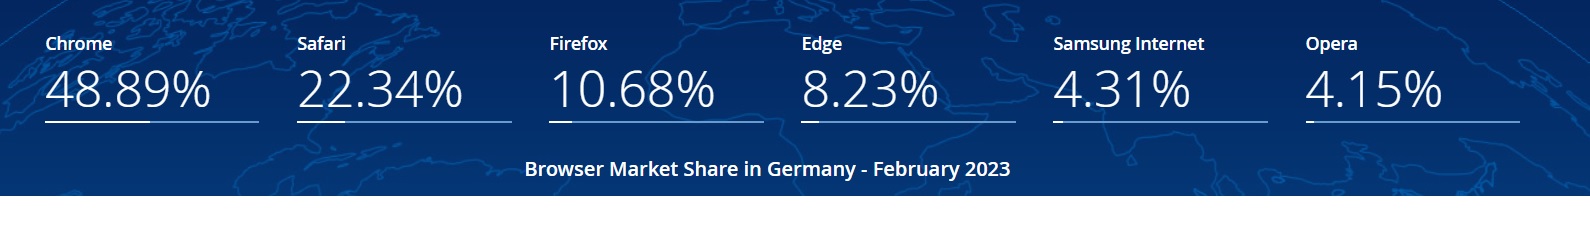 Browser Market Share Germany